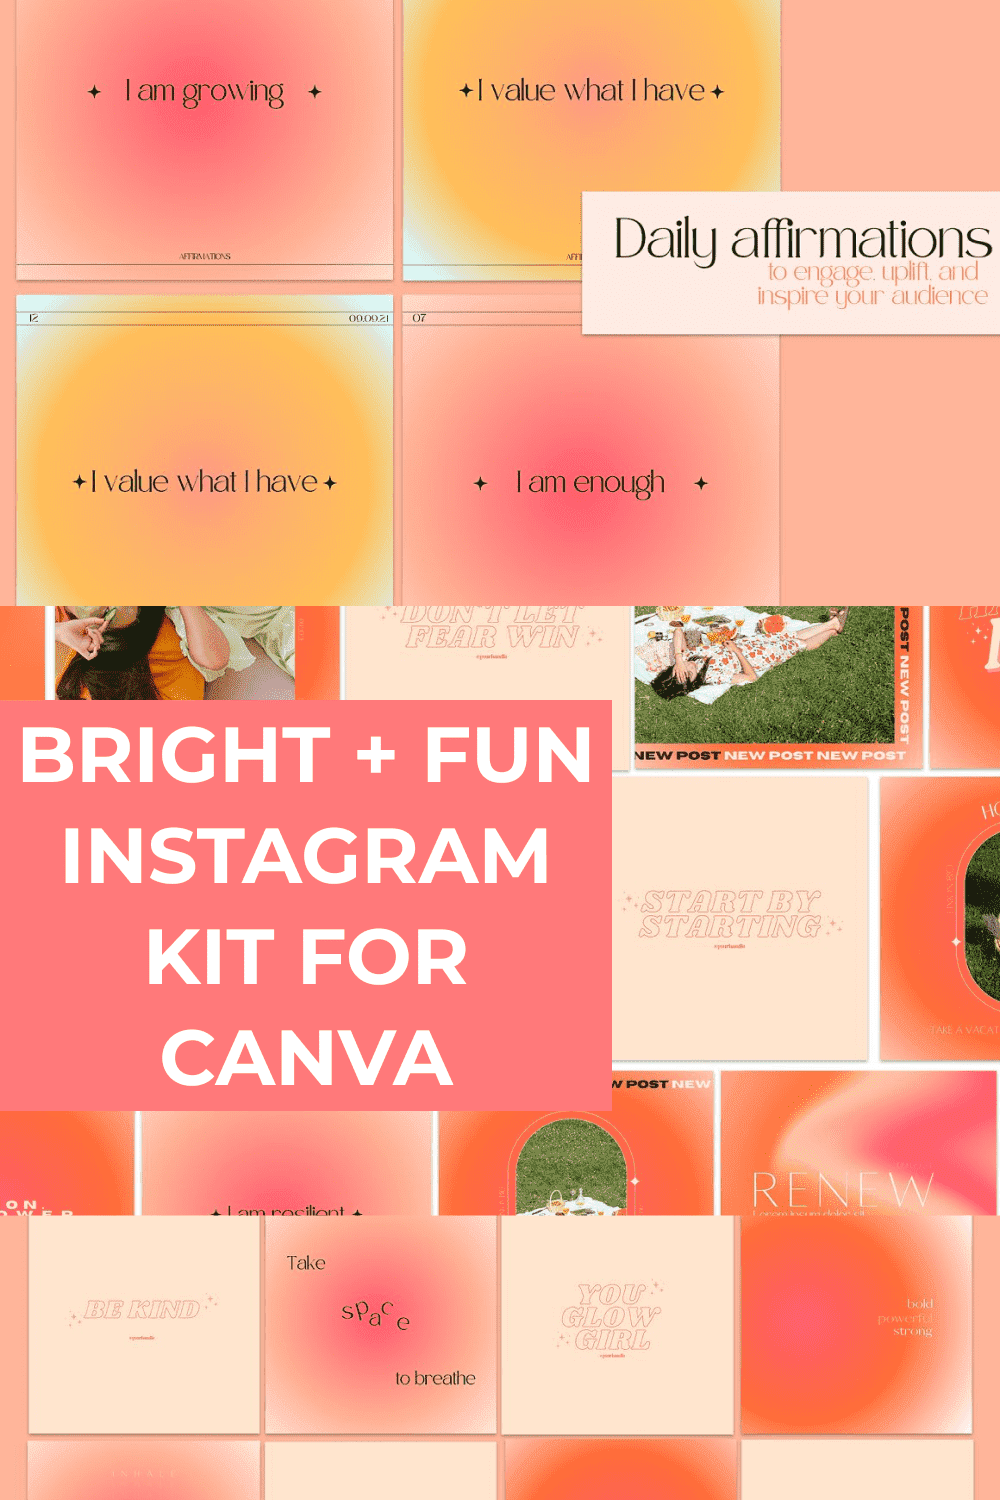 Bright + Fun Instagram Kit For Canva - Daily affirmations.